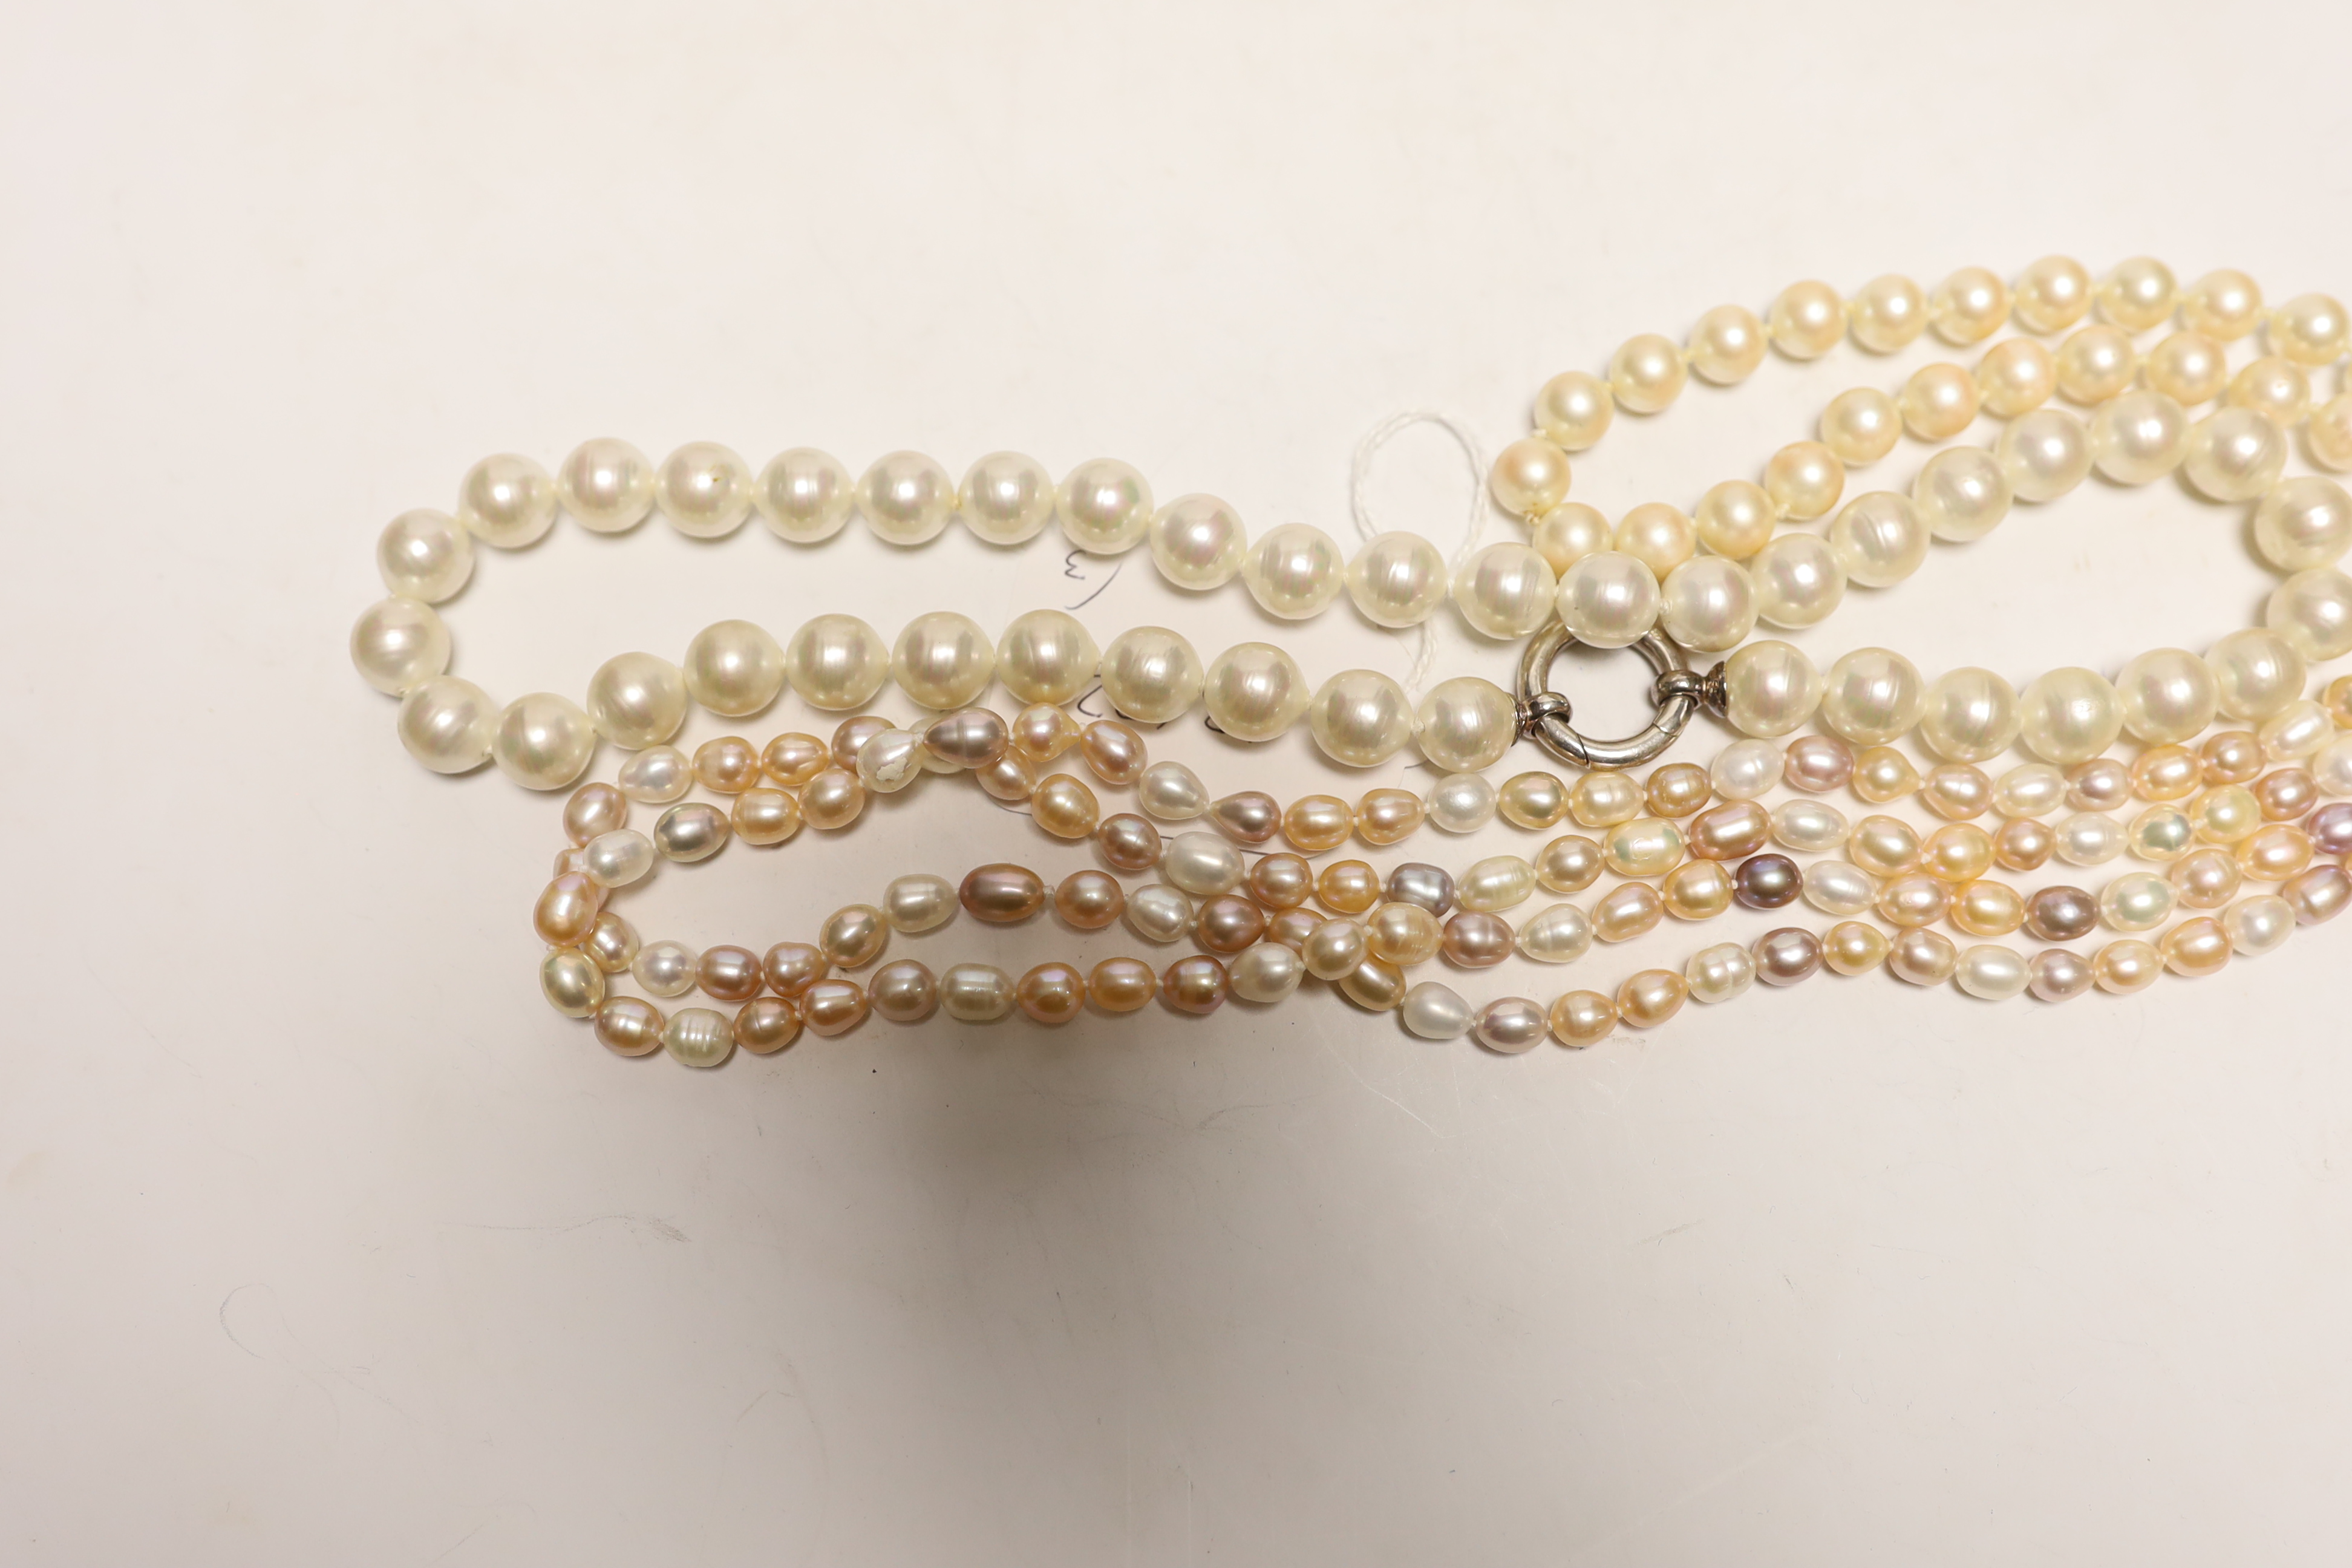 Three assorted single strand cultured South Sea pearl necklaces, largest 136cm. - Image 2 of 3